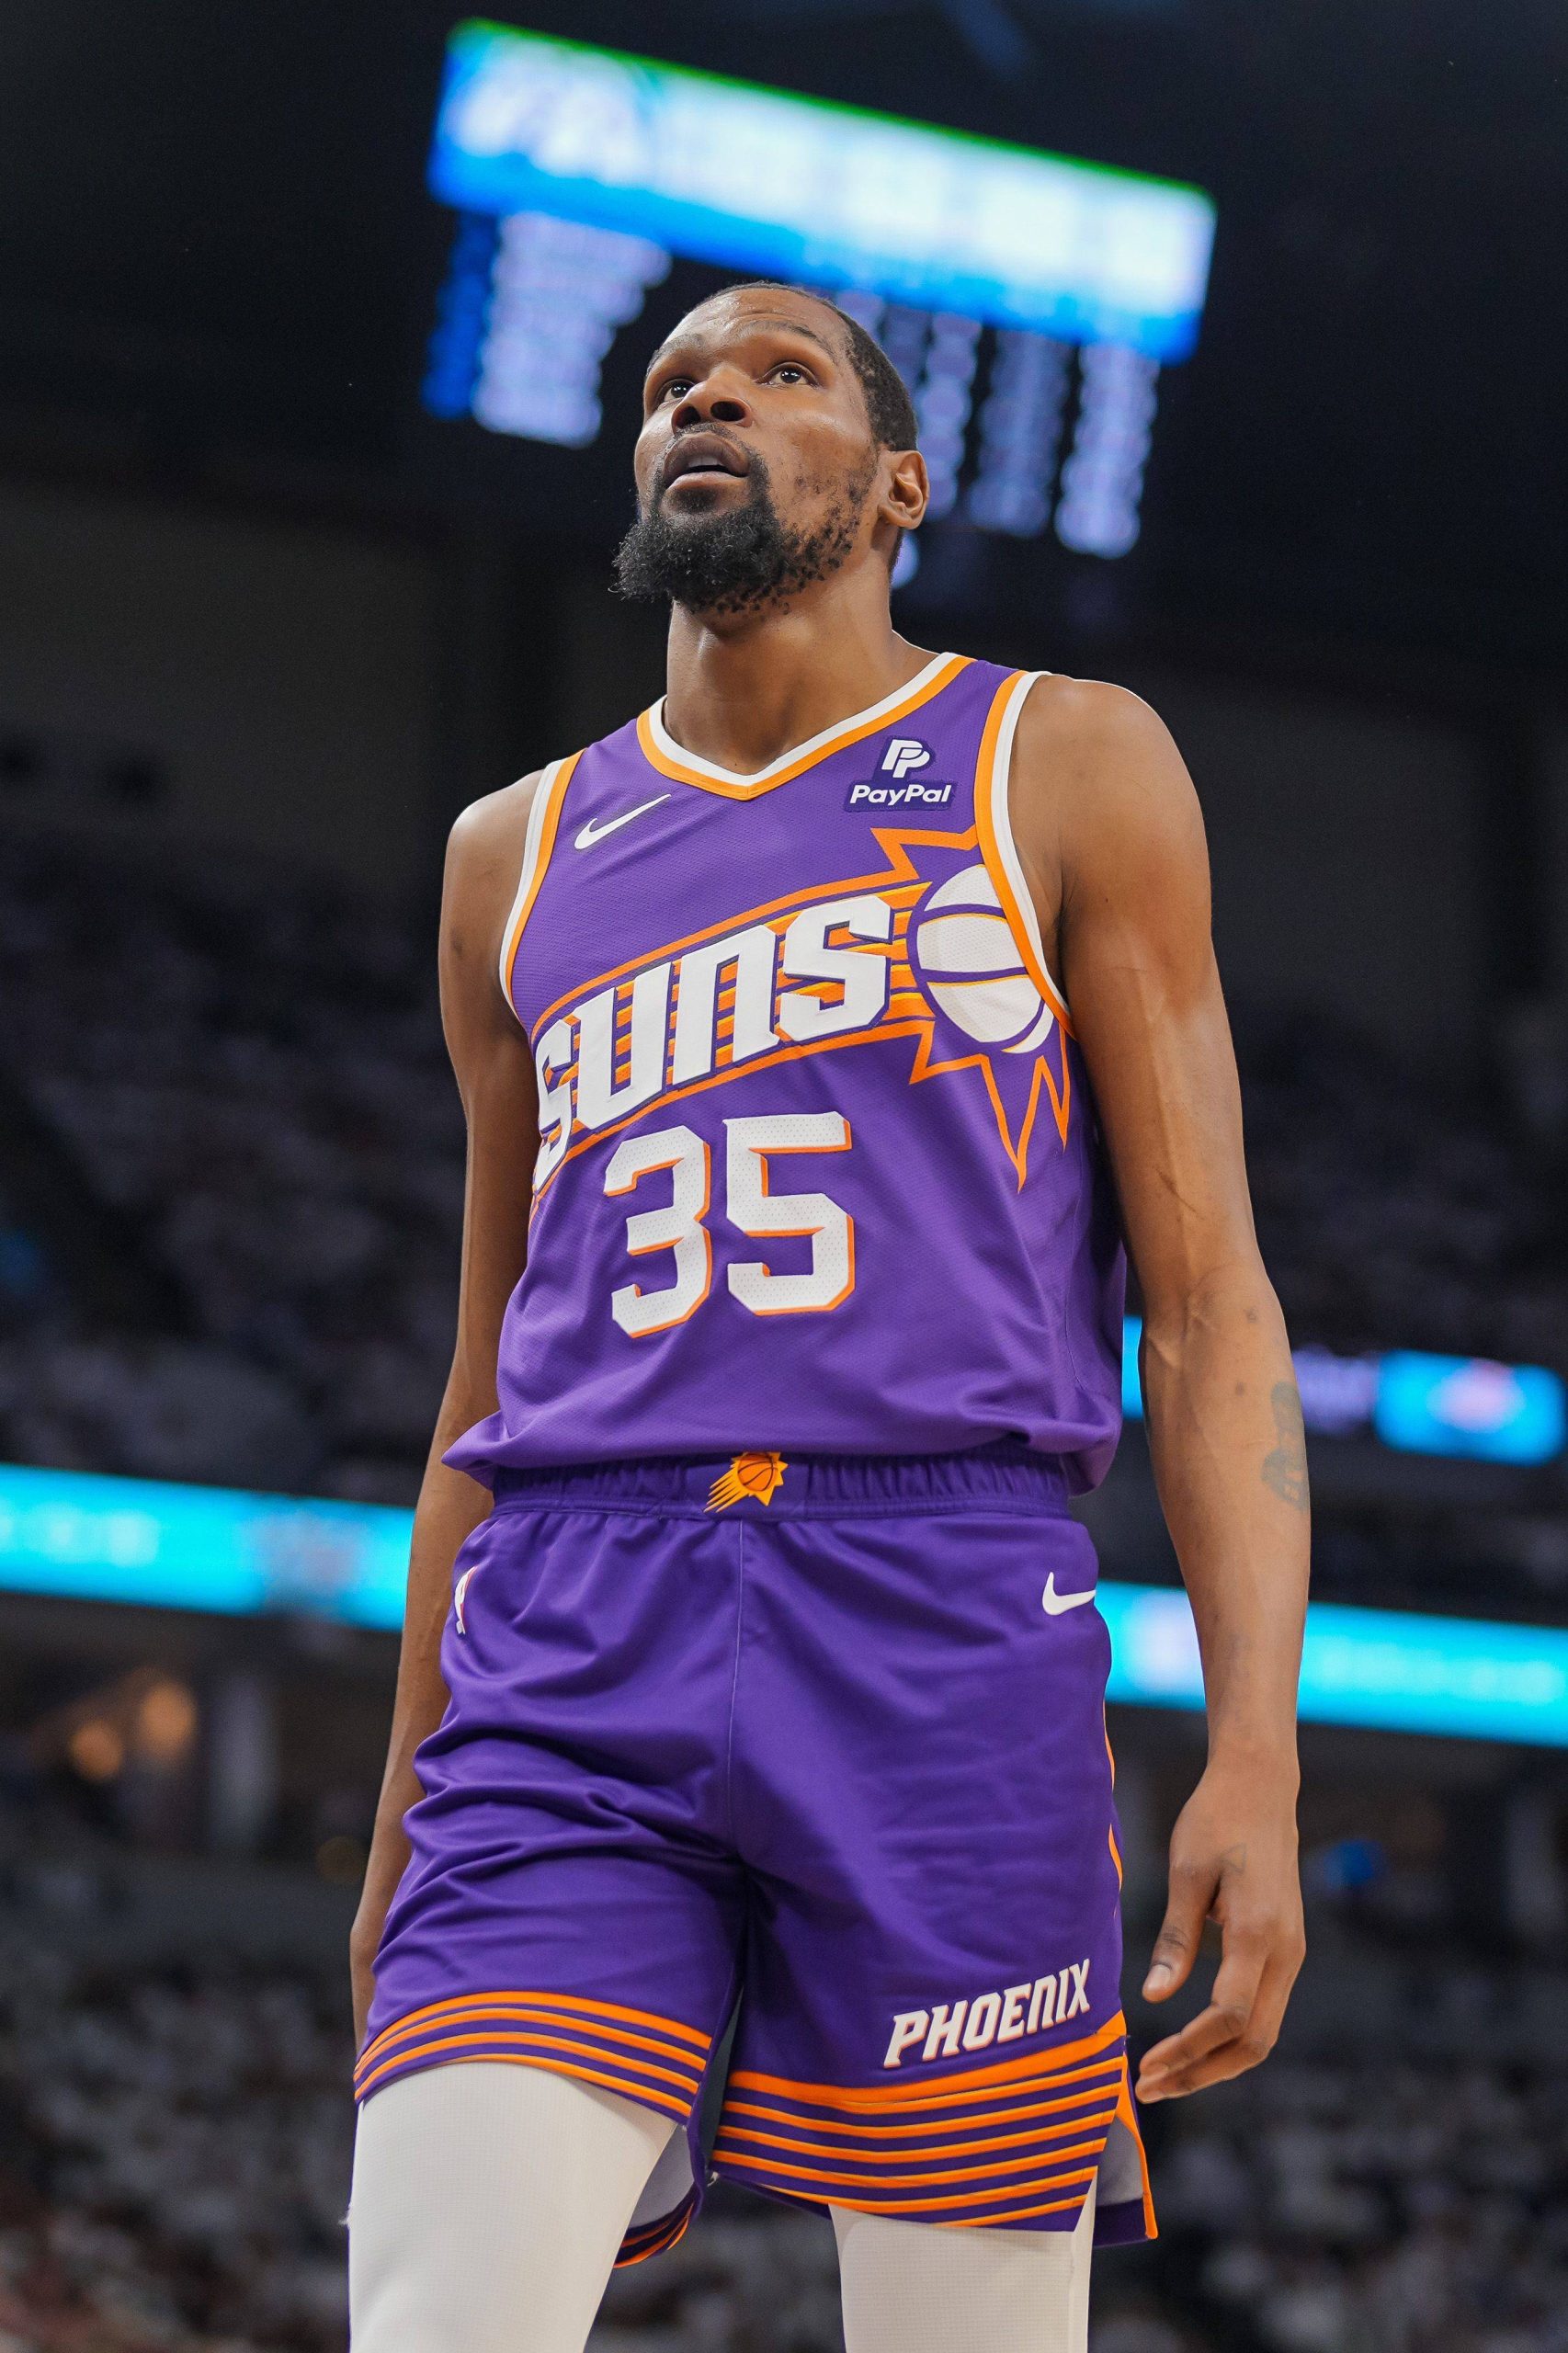 Daydreaming in broad daylight! US Media Proposes Trade Scenario: Knicks Acquire Durant, Send Randle and Assets to Suns